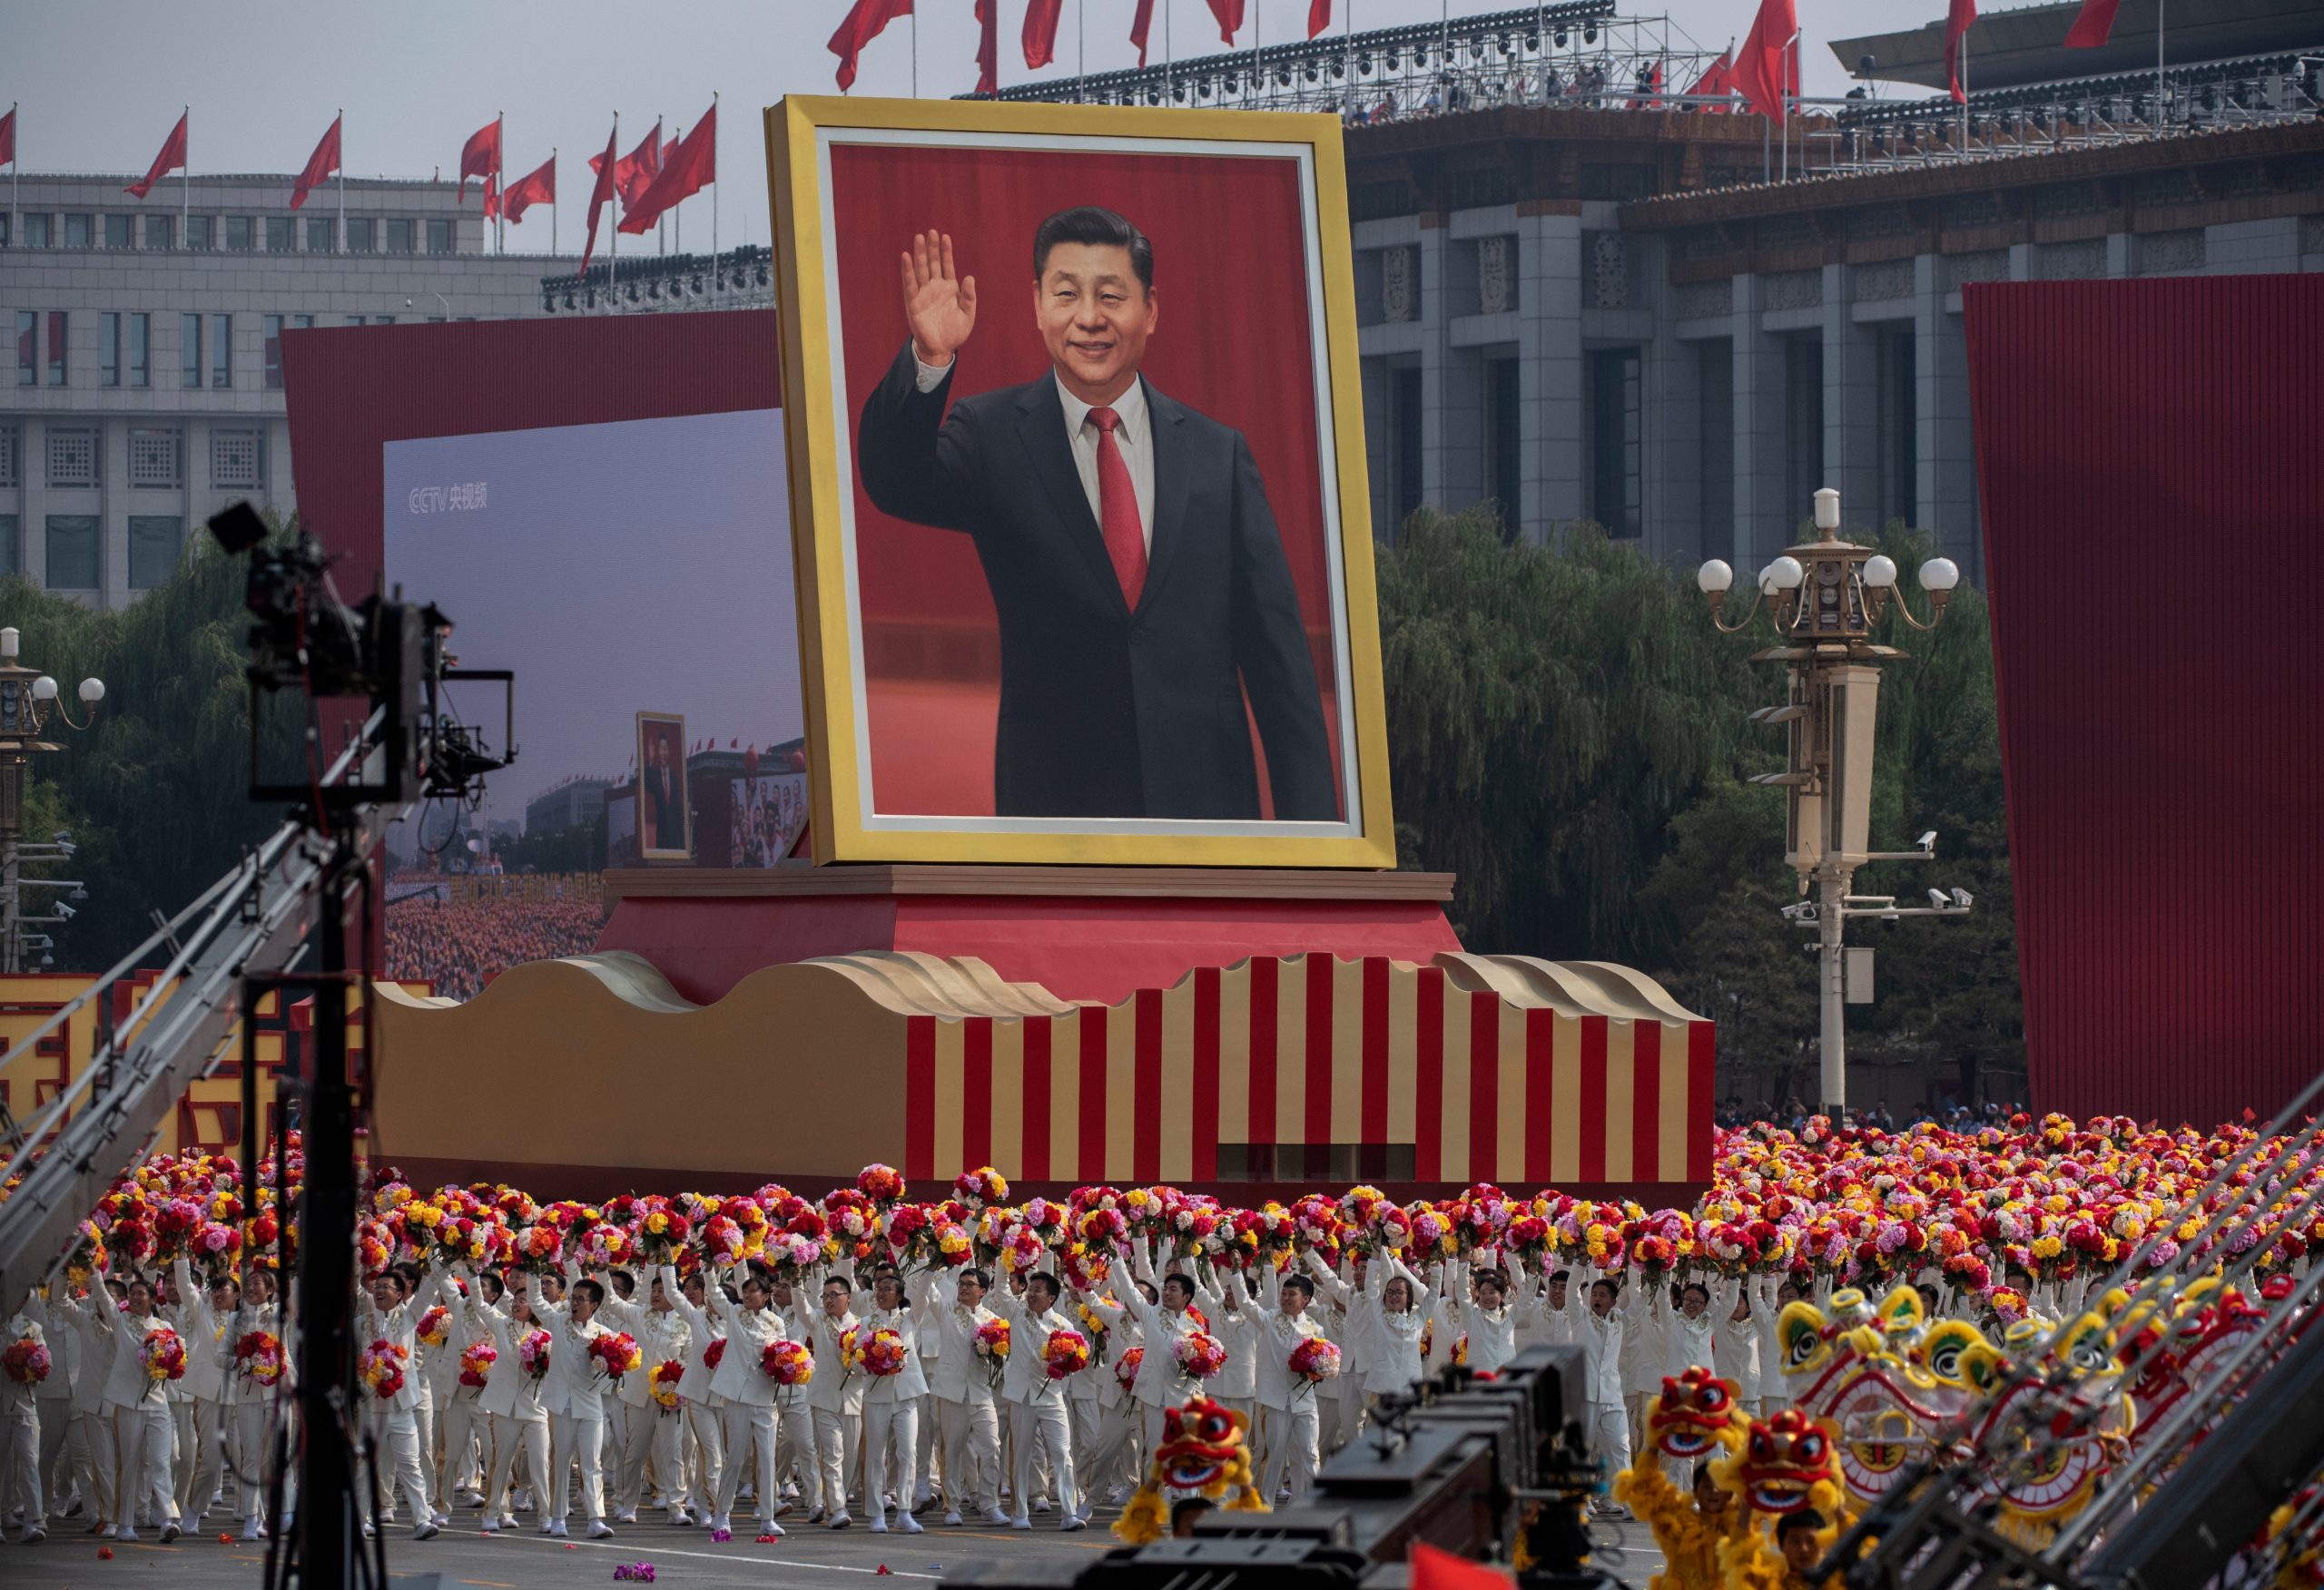 A giant photo of Xi Jinping is hoisted by a parade float on the CC